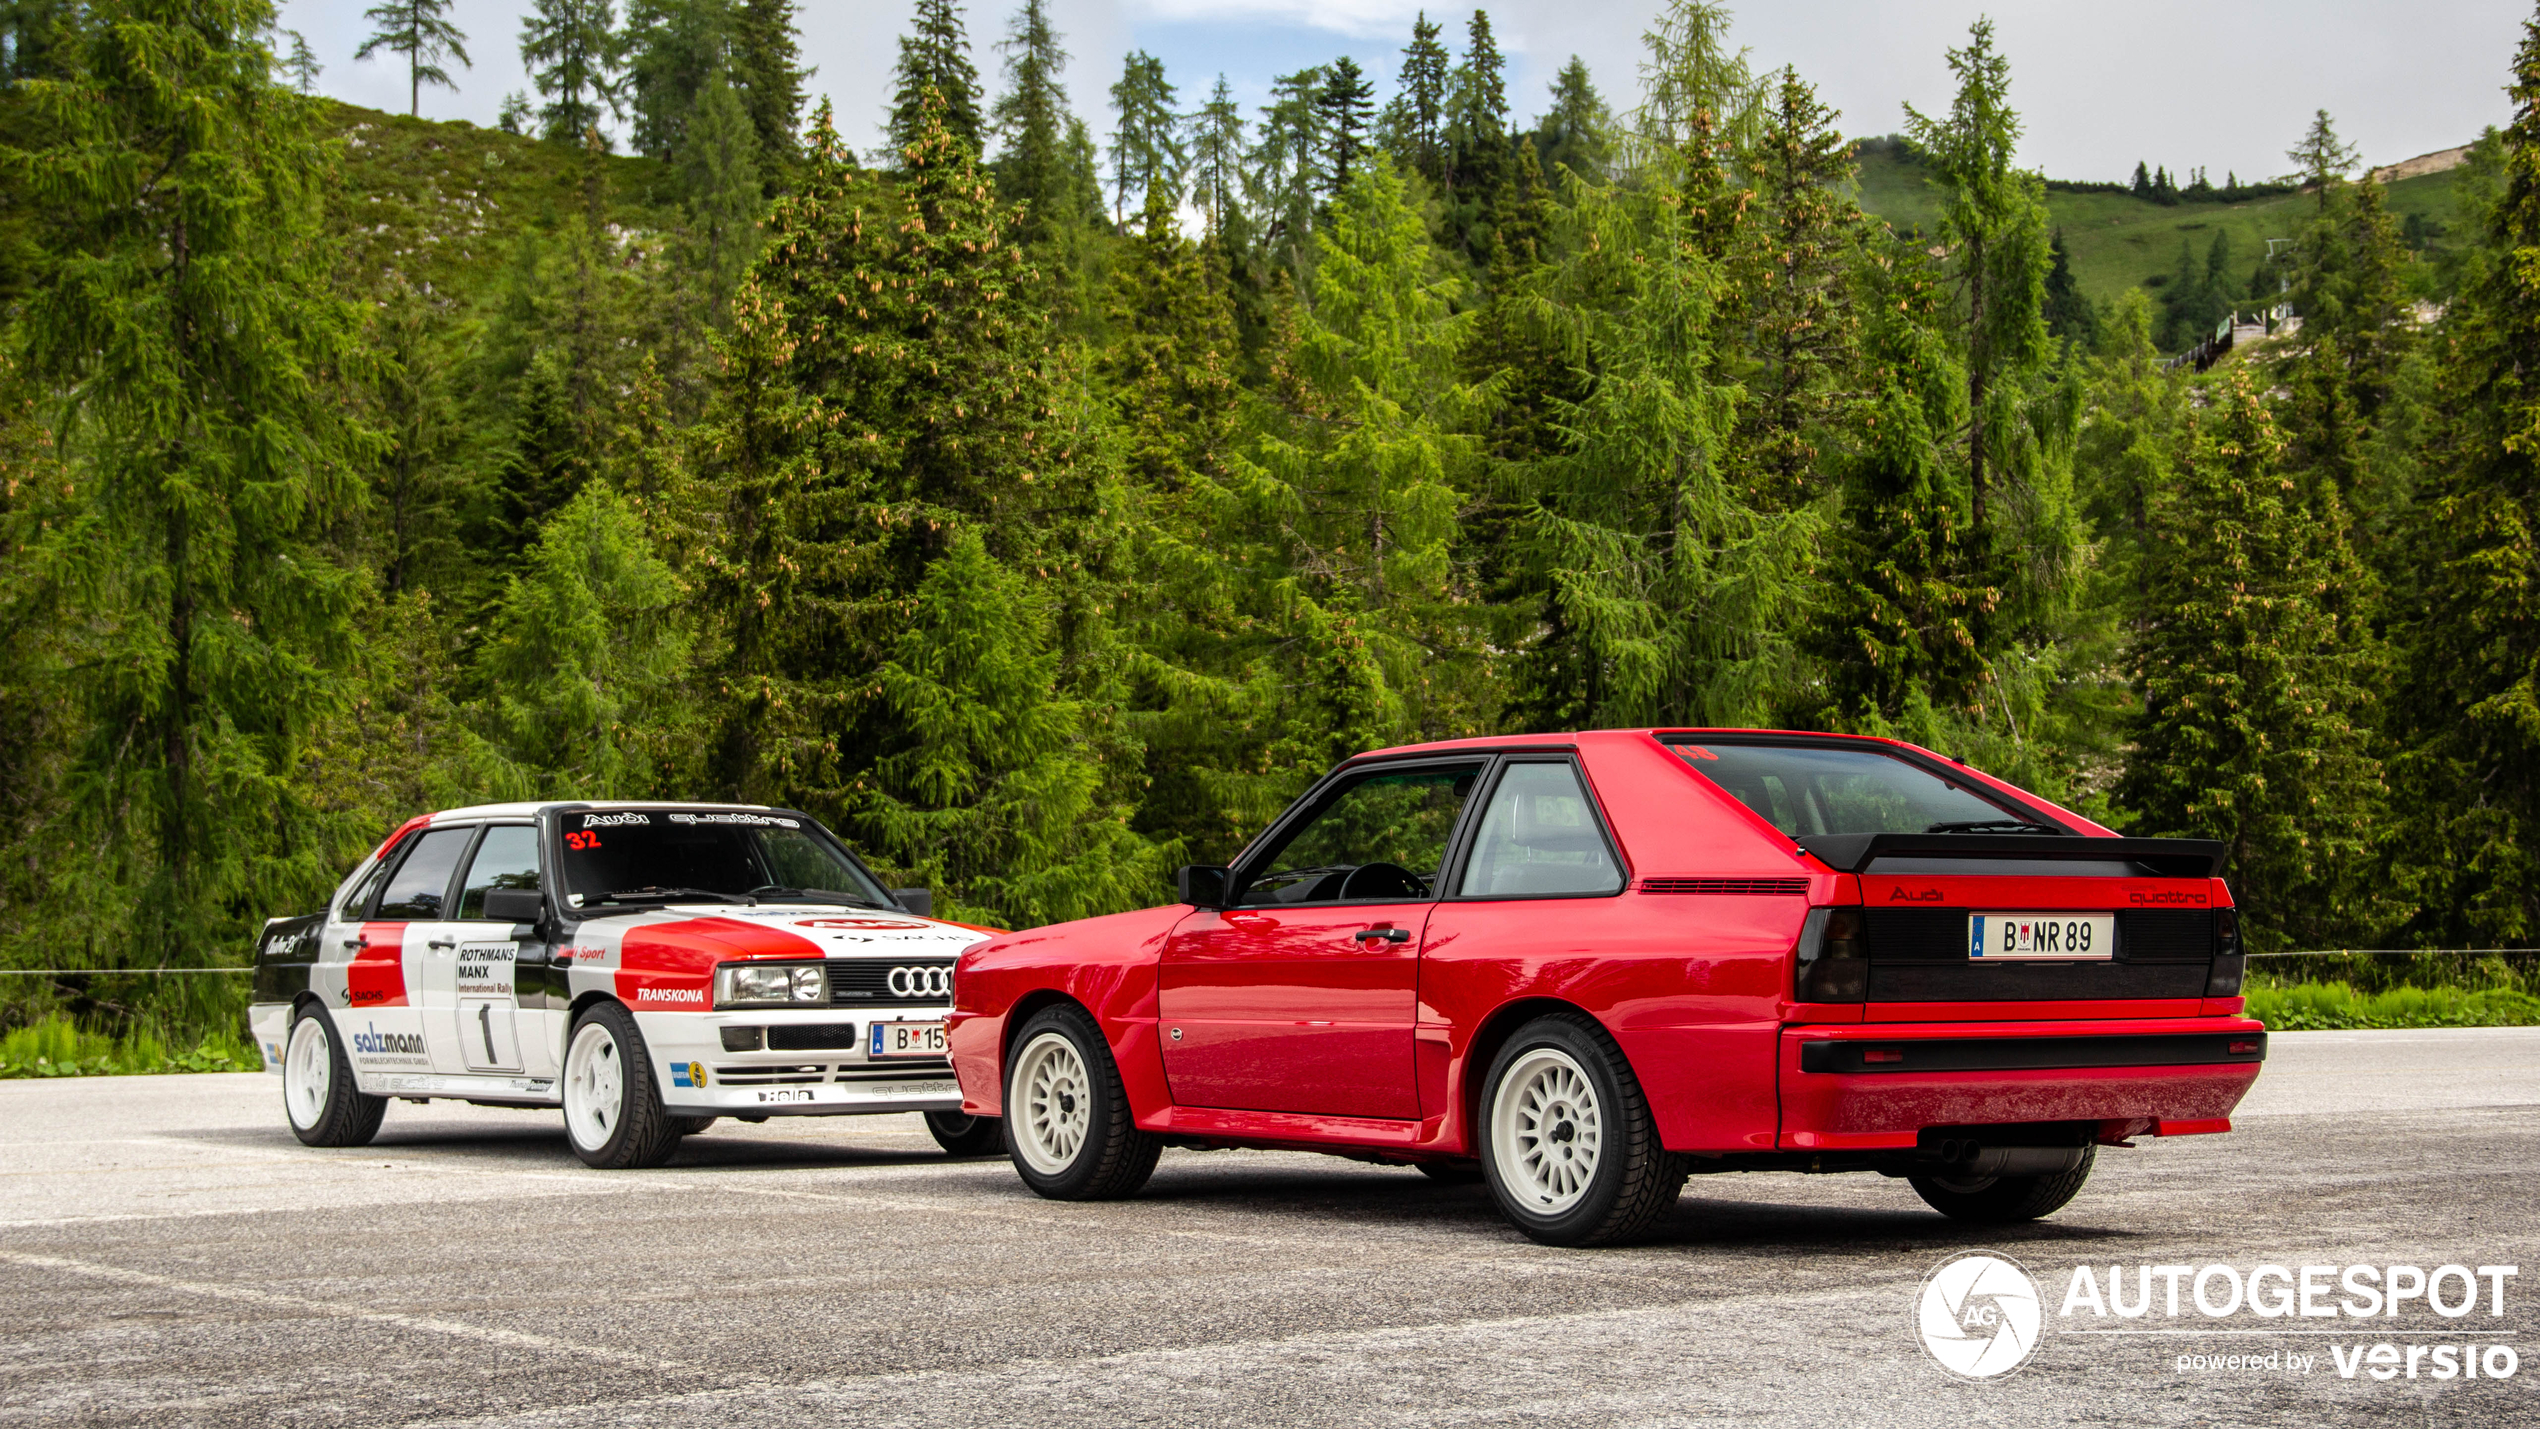 Two legends from audi are photographed in Tauplitz